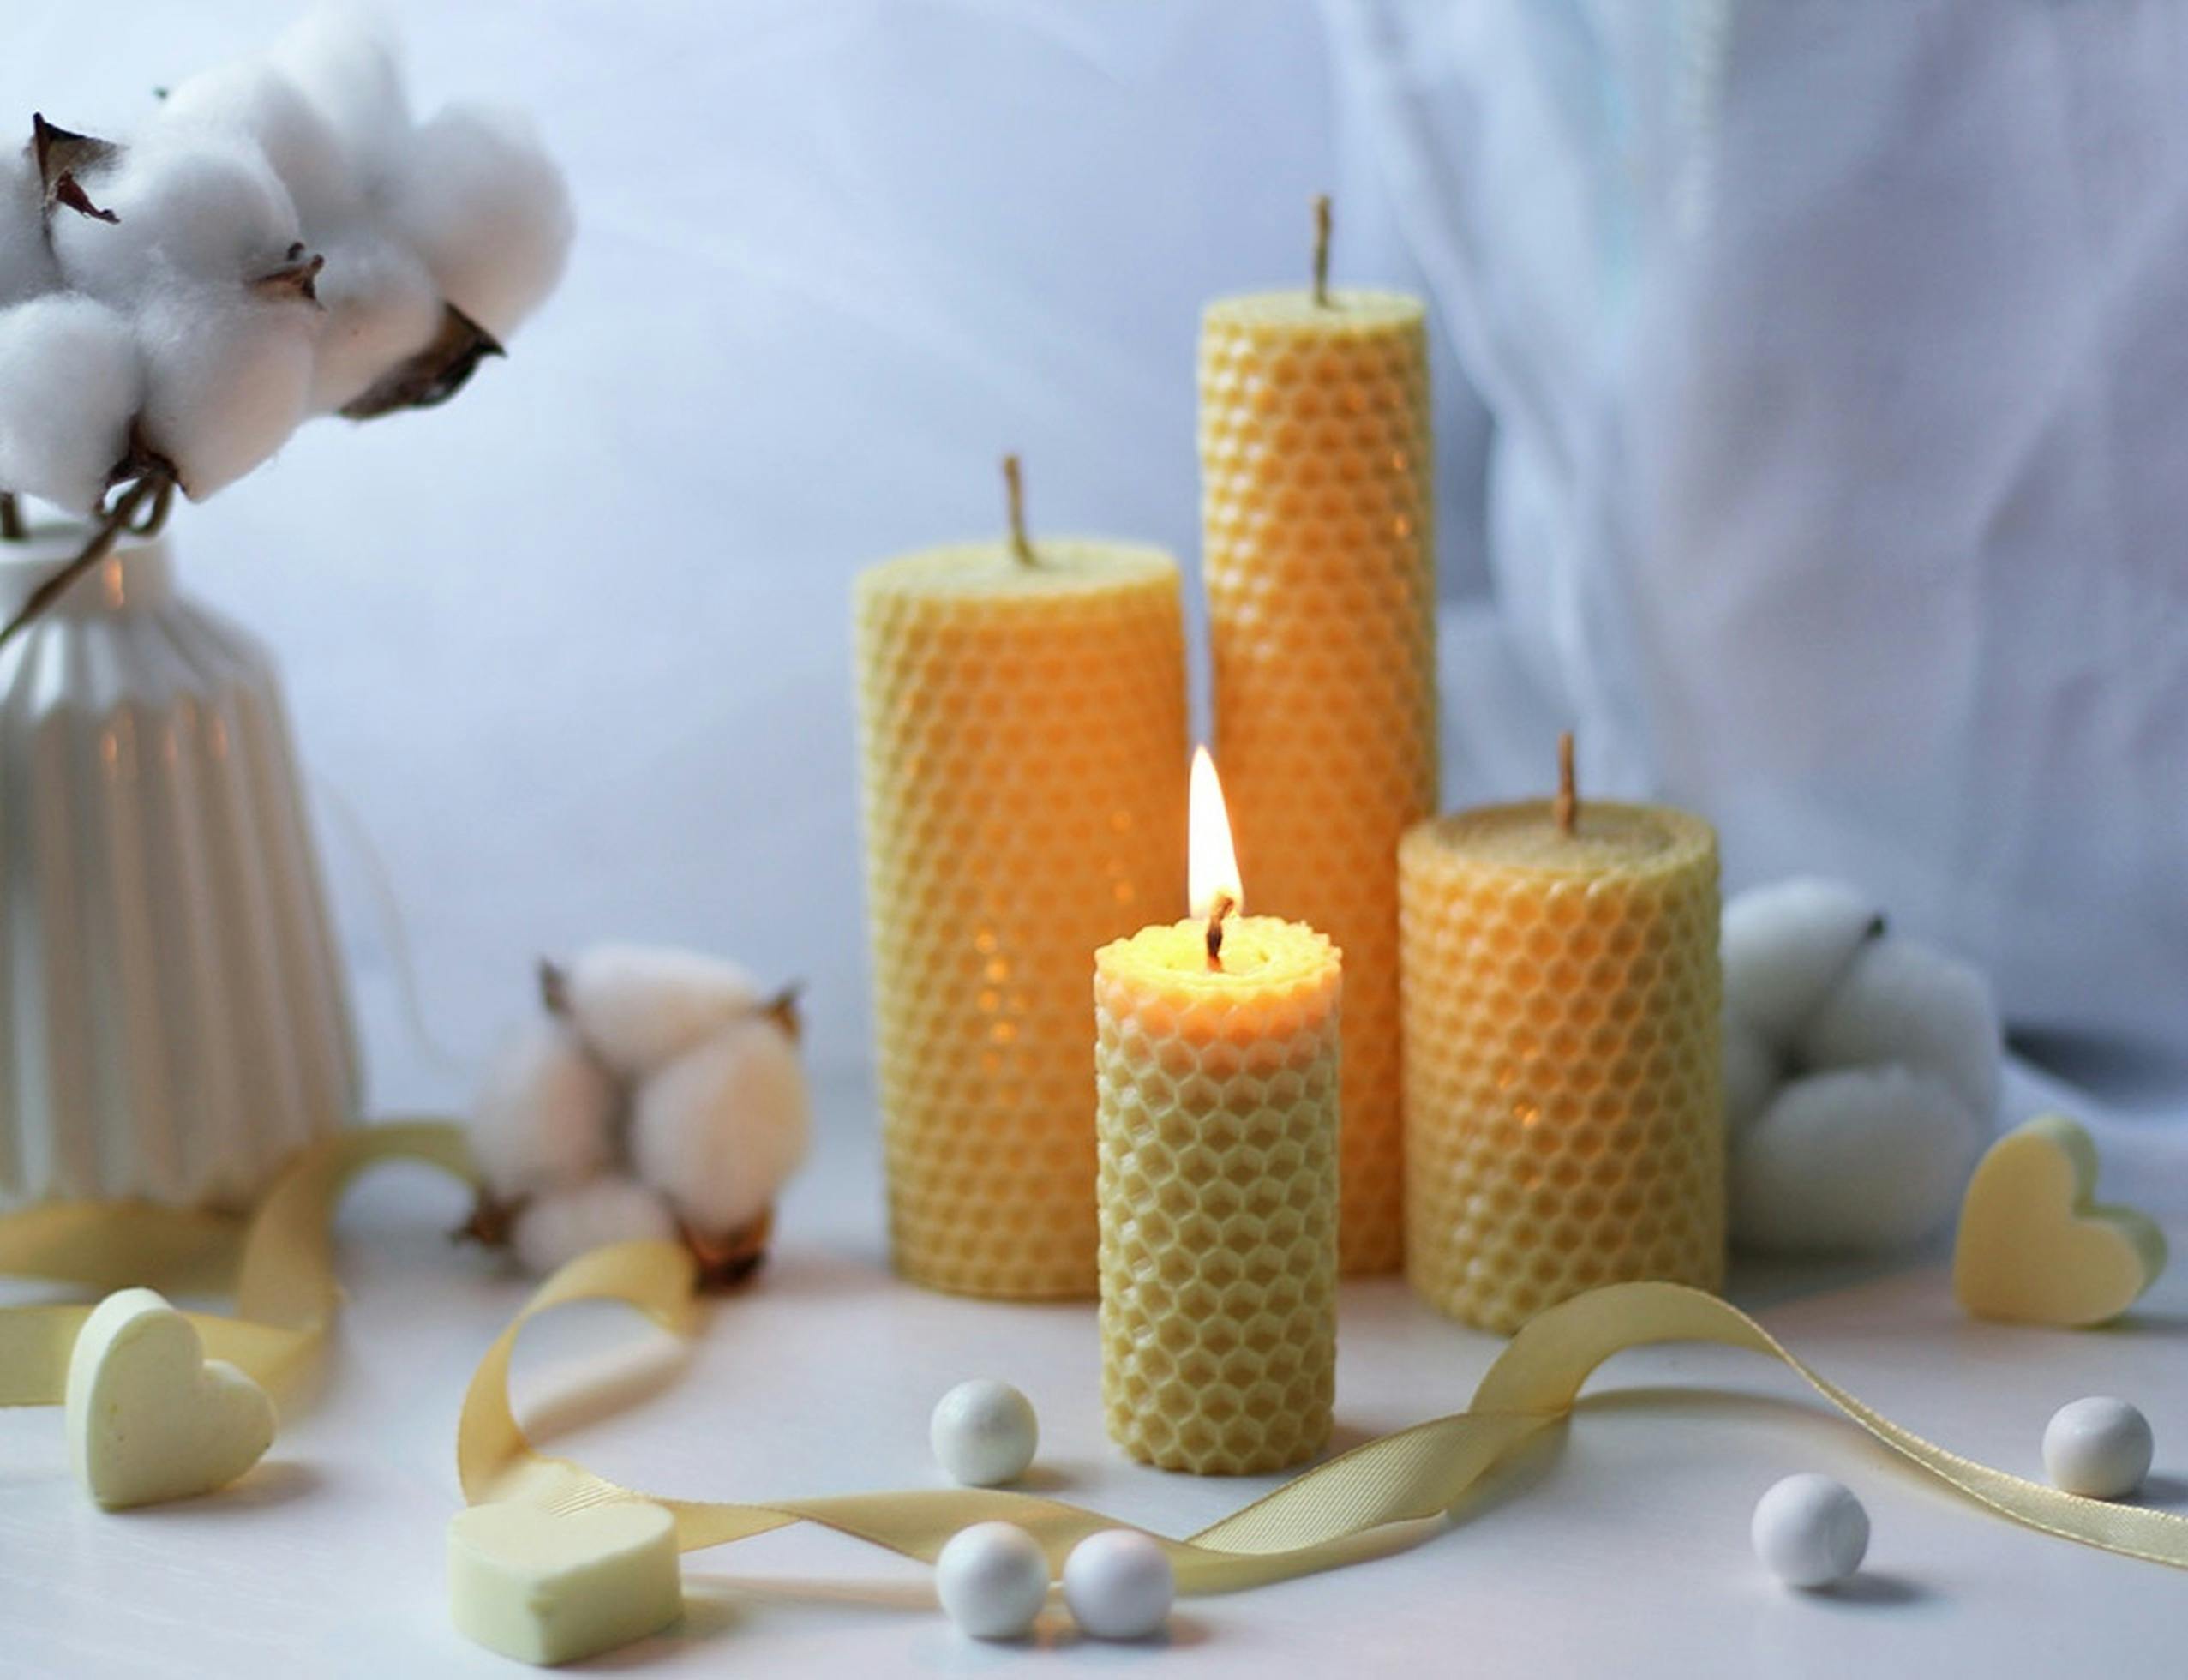 Candles, cotton flowers and ribbon